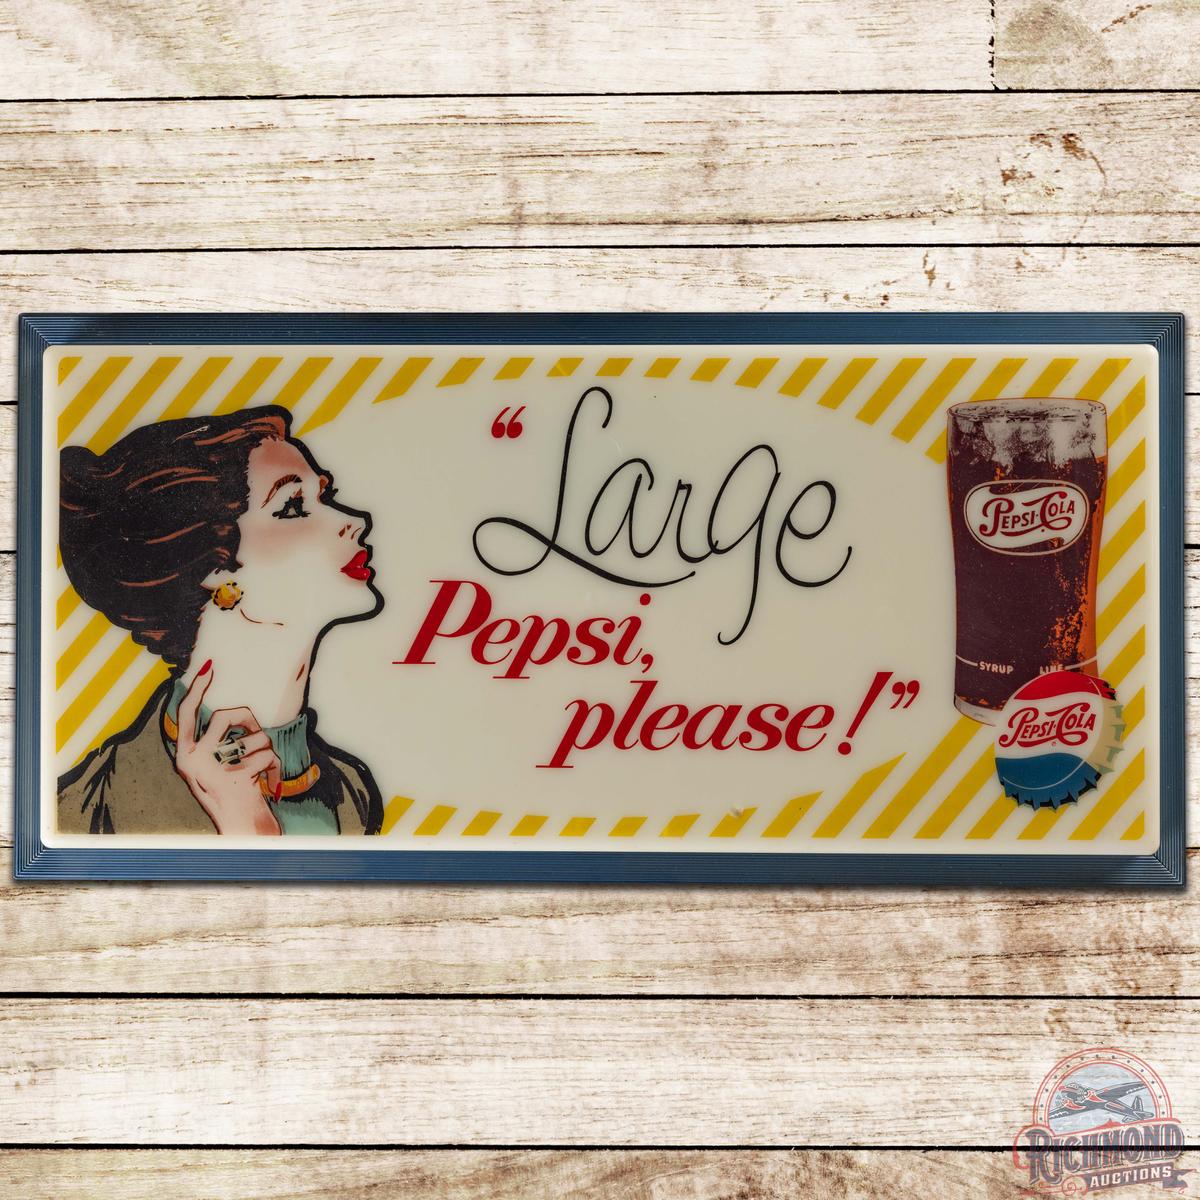 Pepsi Cola "Large Pepsi Please" w/ Lady and Glass Lighted Advertising Sign